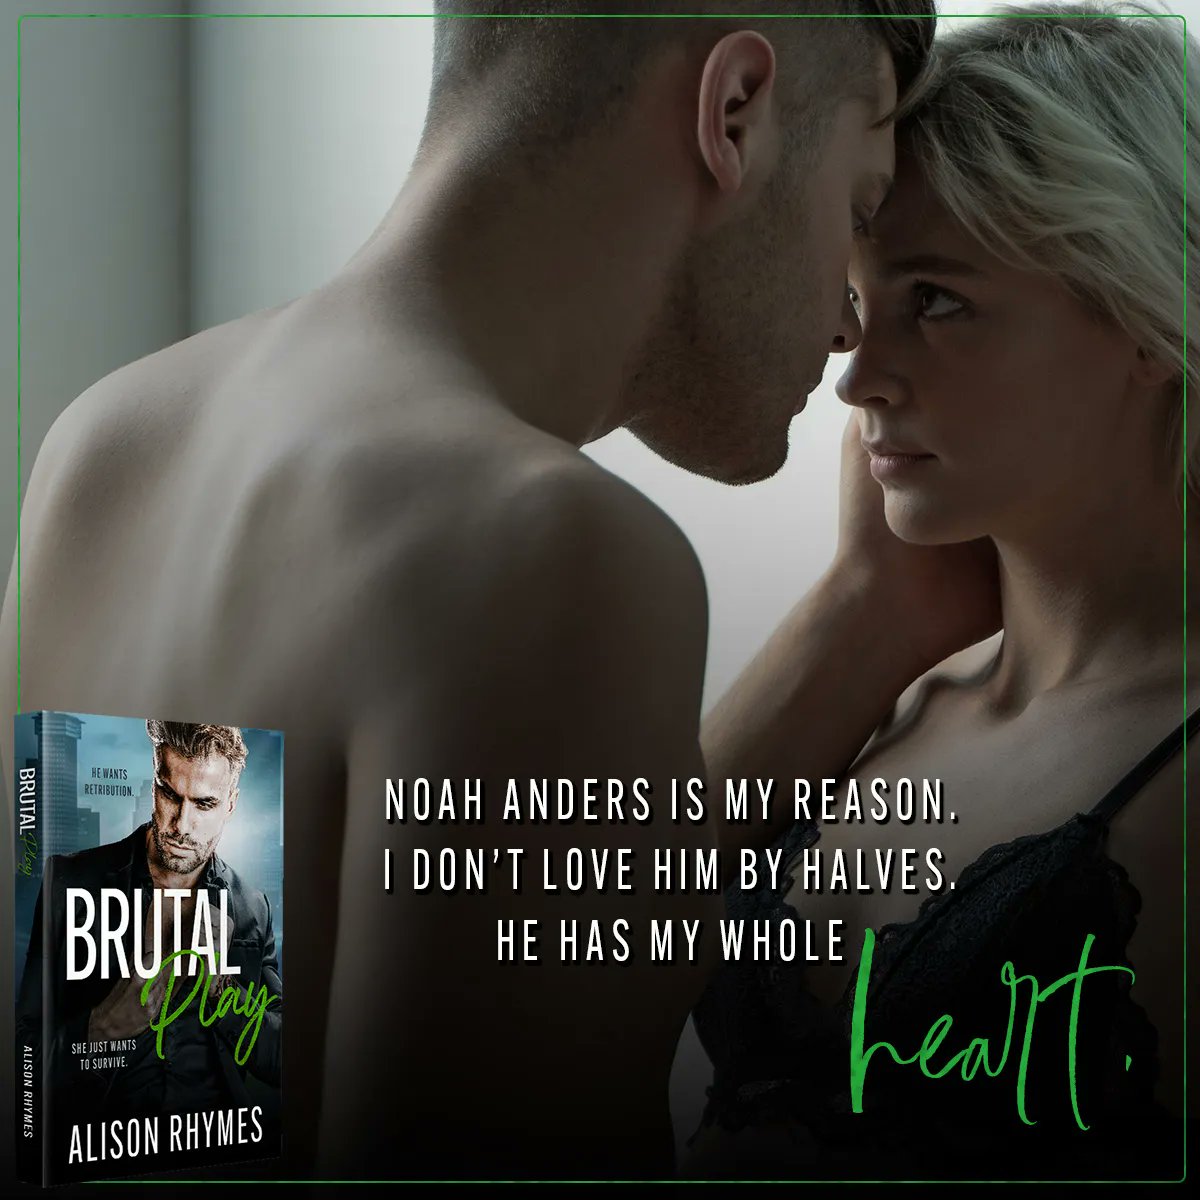 𝐁𝐫𝐮𝐭𝐚𝐥 𝐏𝐥𝐚𝐲 by Alison Rhymes is coming October 25th! This is an enemies to lovers, second chance romance that you won't want to miss! Pre-order here: buff.ly/3r8zMOL